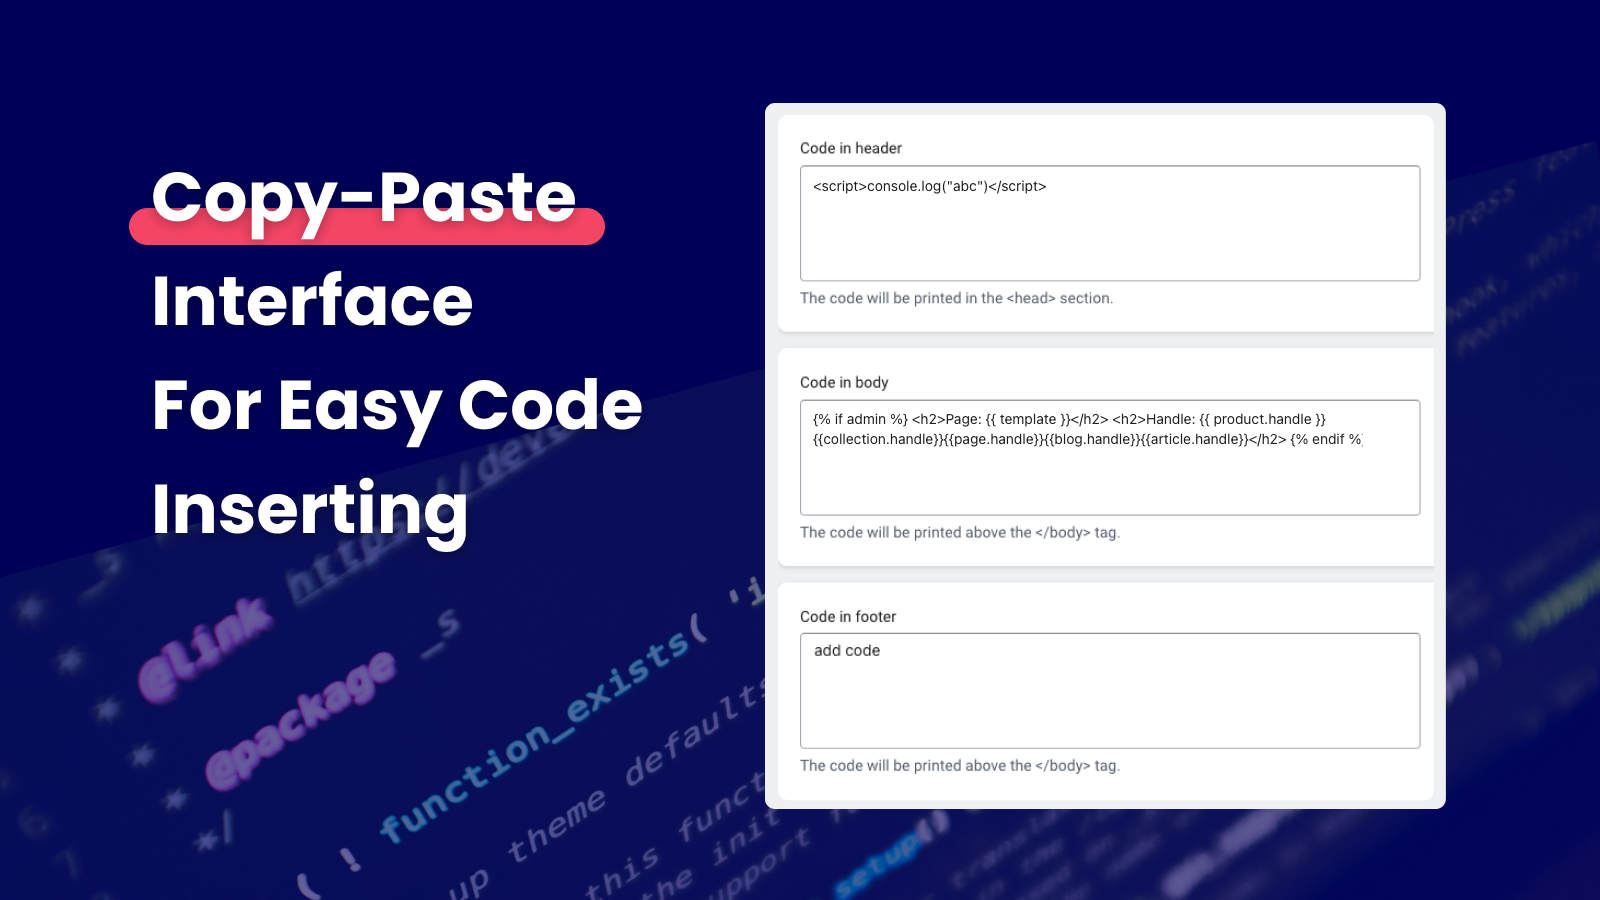 Copy and paste interface for easy code inserting